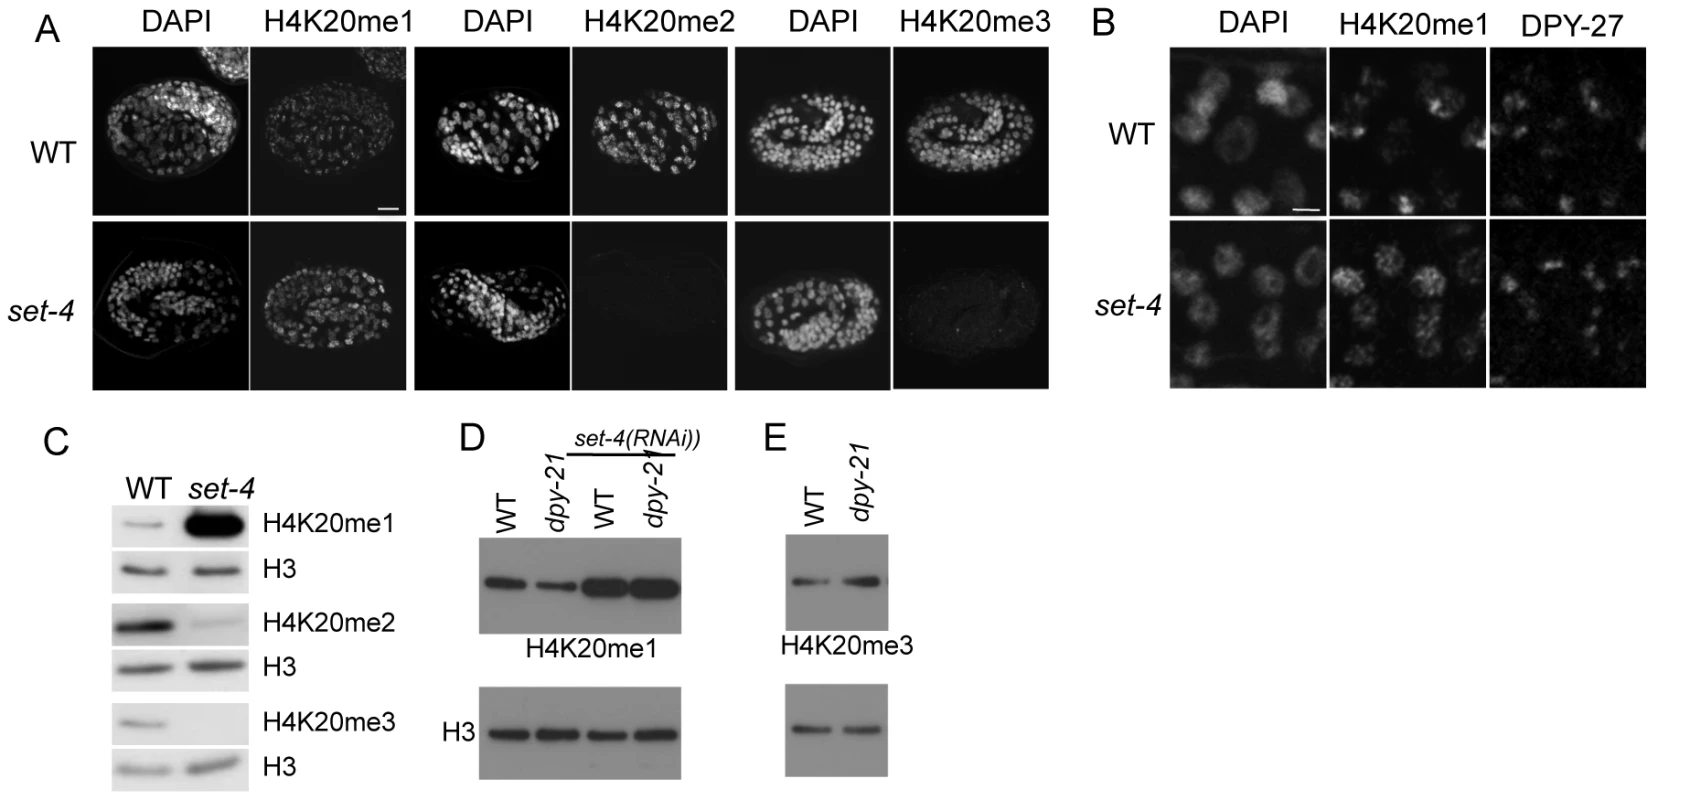 The SET-4 histone methyltransferase is necessary to generate H4K20me2 and H4K20me3.